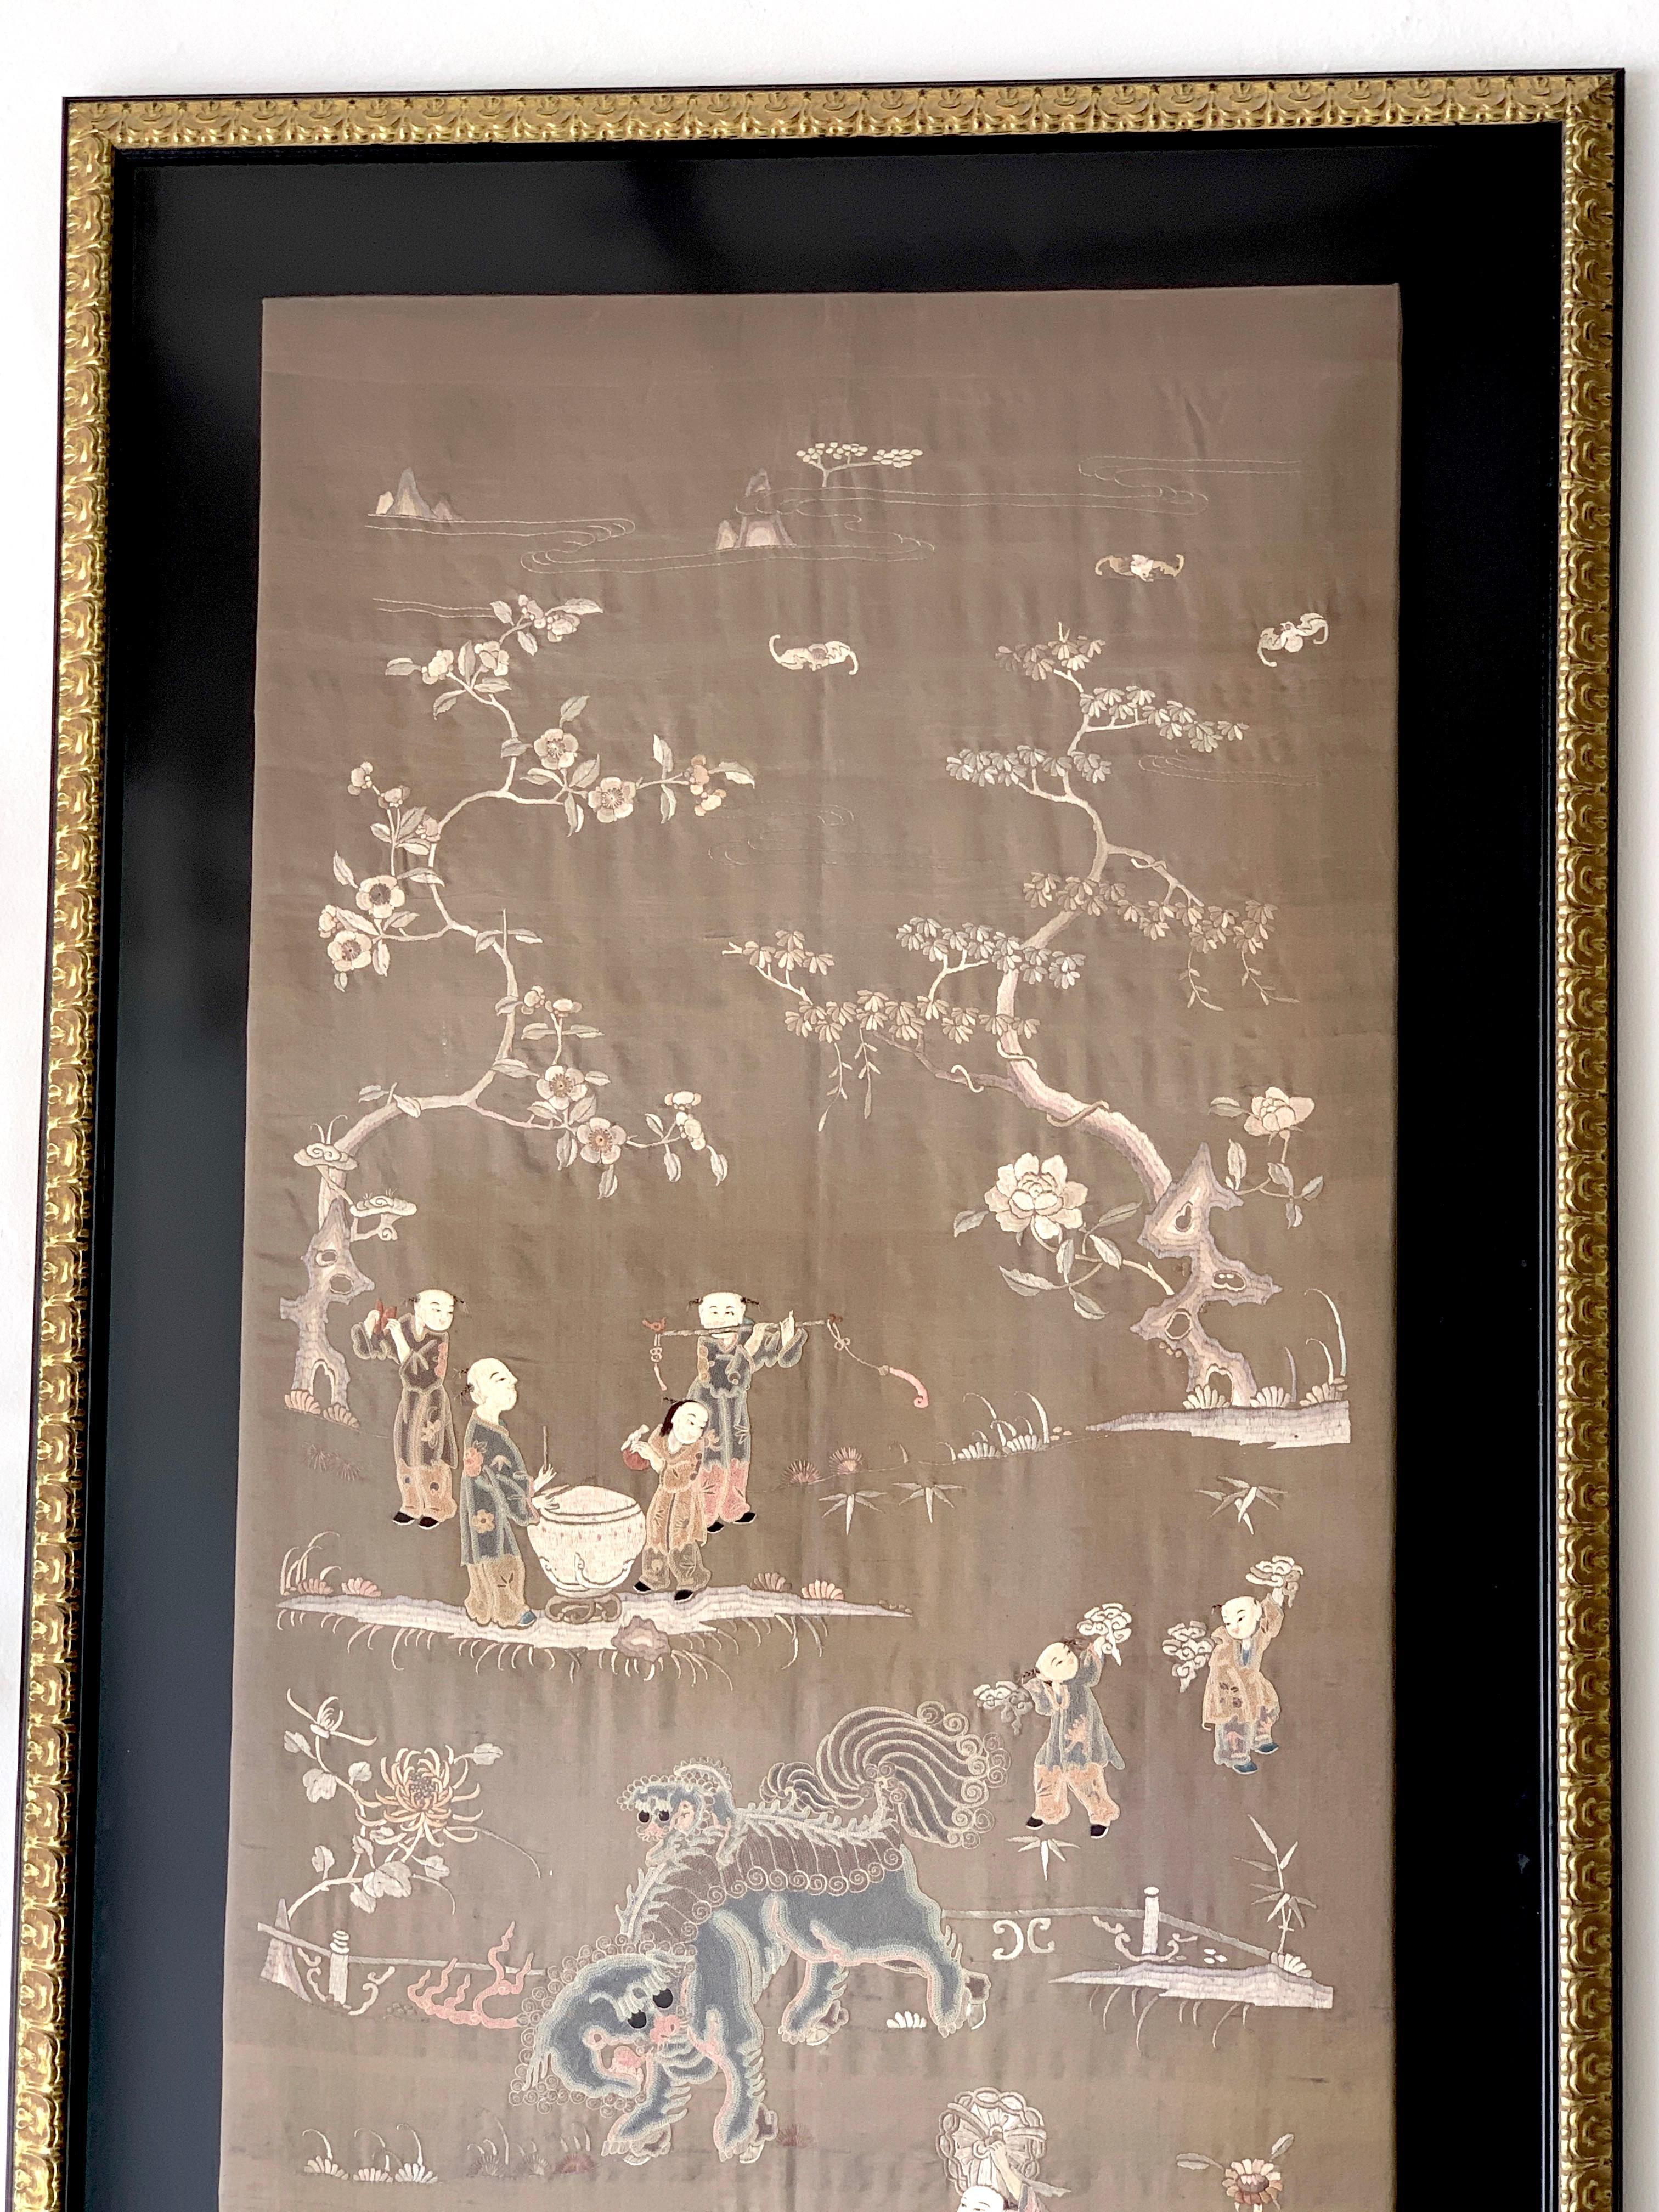 Gilt Exquisite Chinese Export Landscape Silk Embroidery